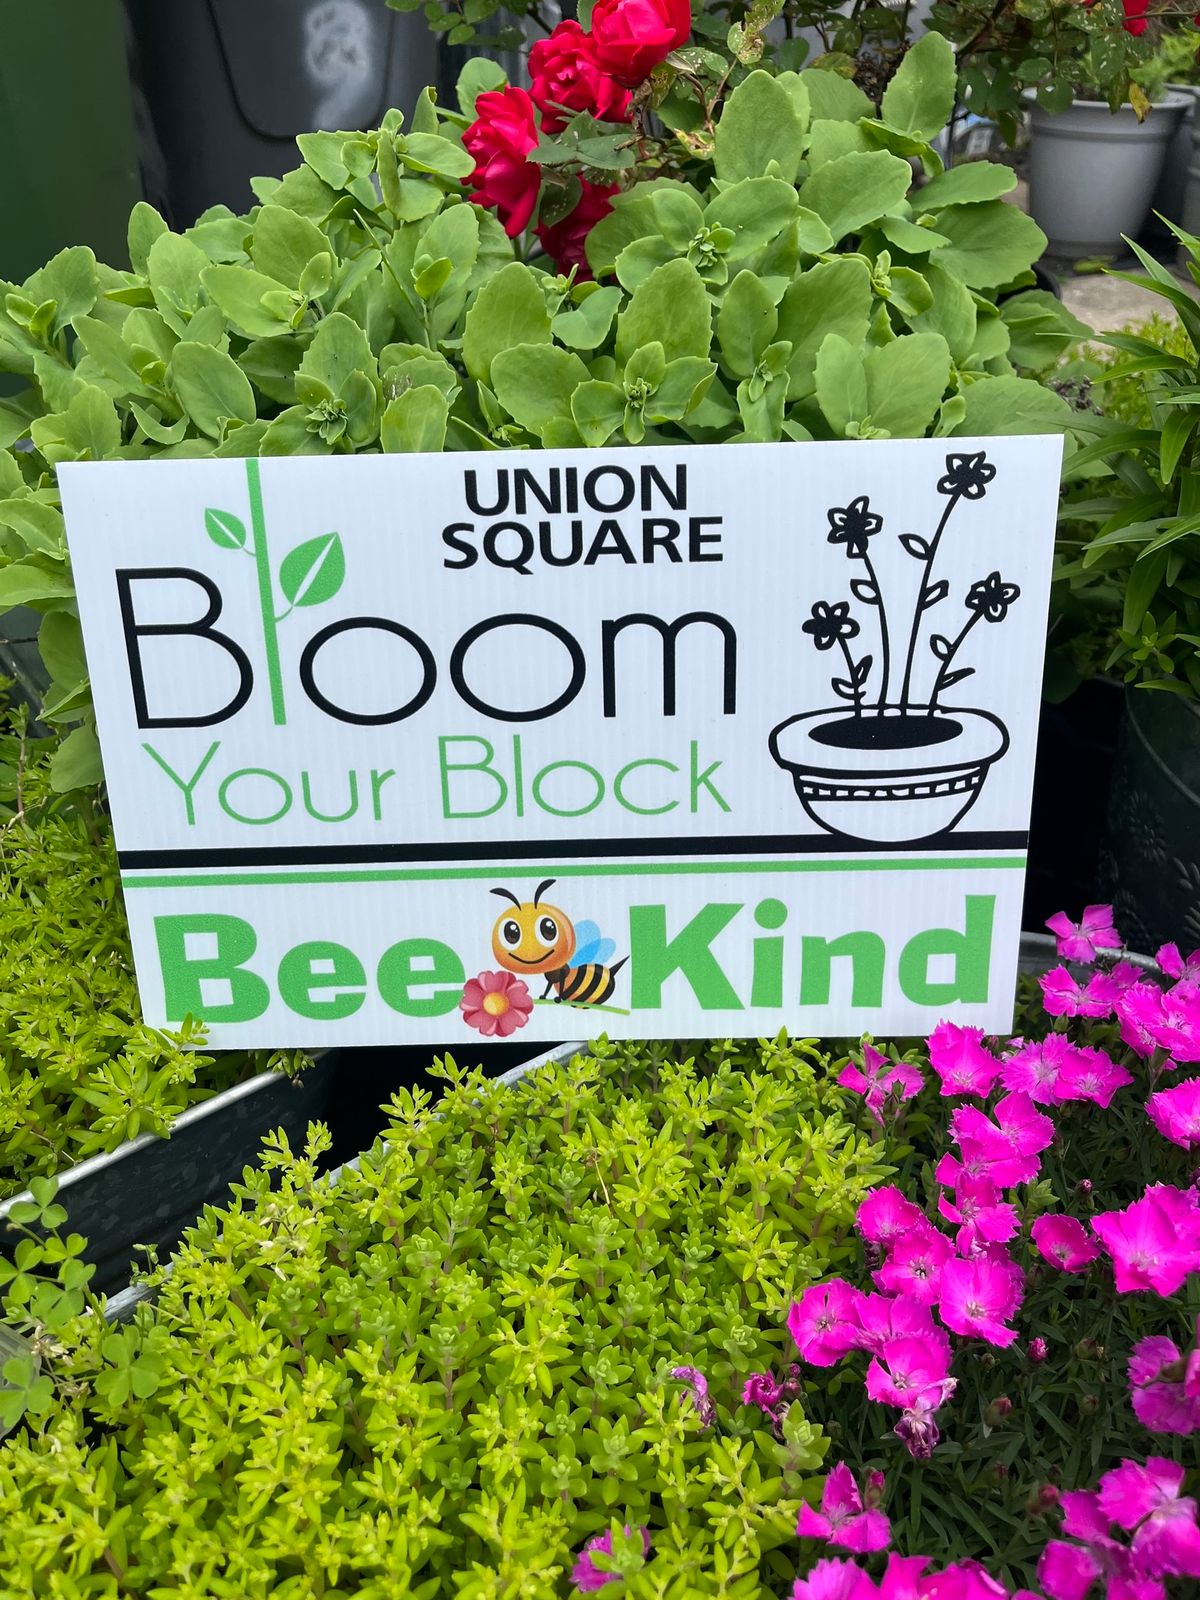 Union Square Bloom Your Block Judging and Celebration